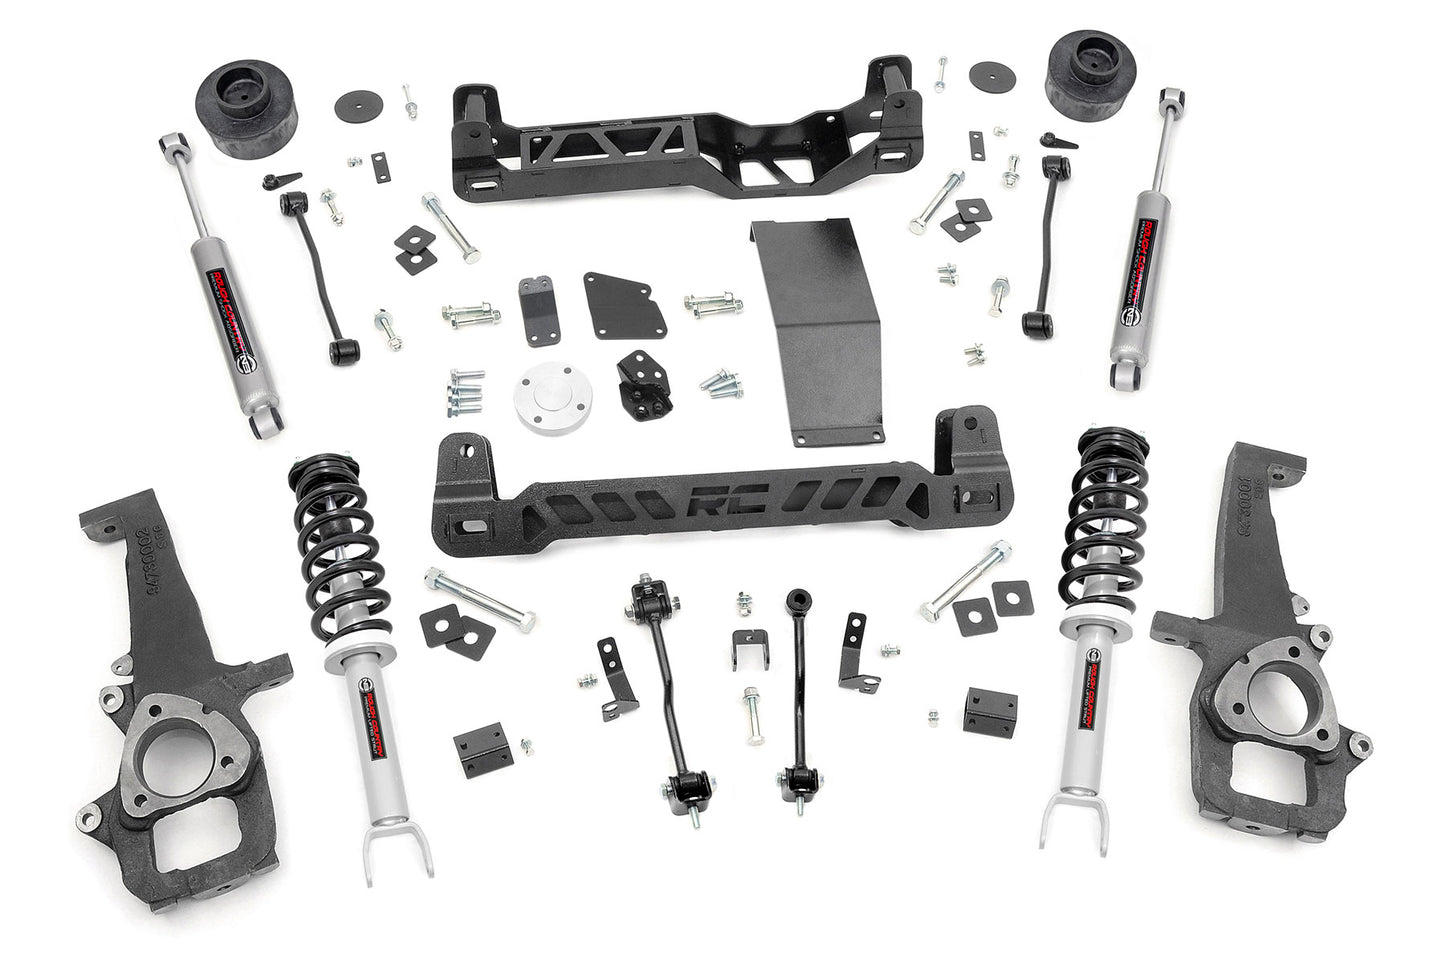 Rough Country (33332) 4 Inch Lift Kit | N3 Struts | Ram 1500 4WD (2012-2018 & Classic)